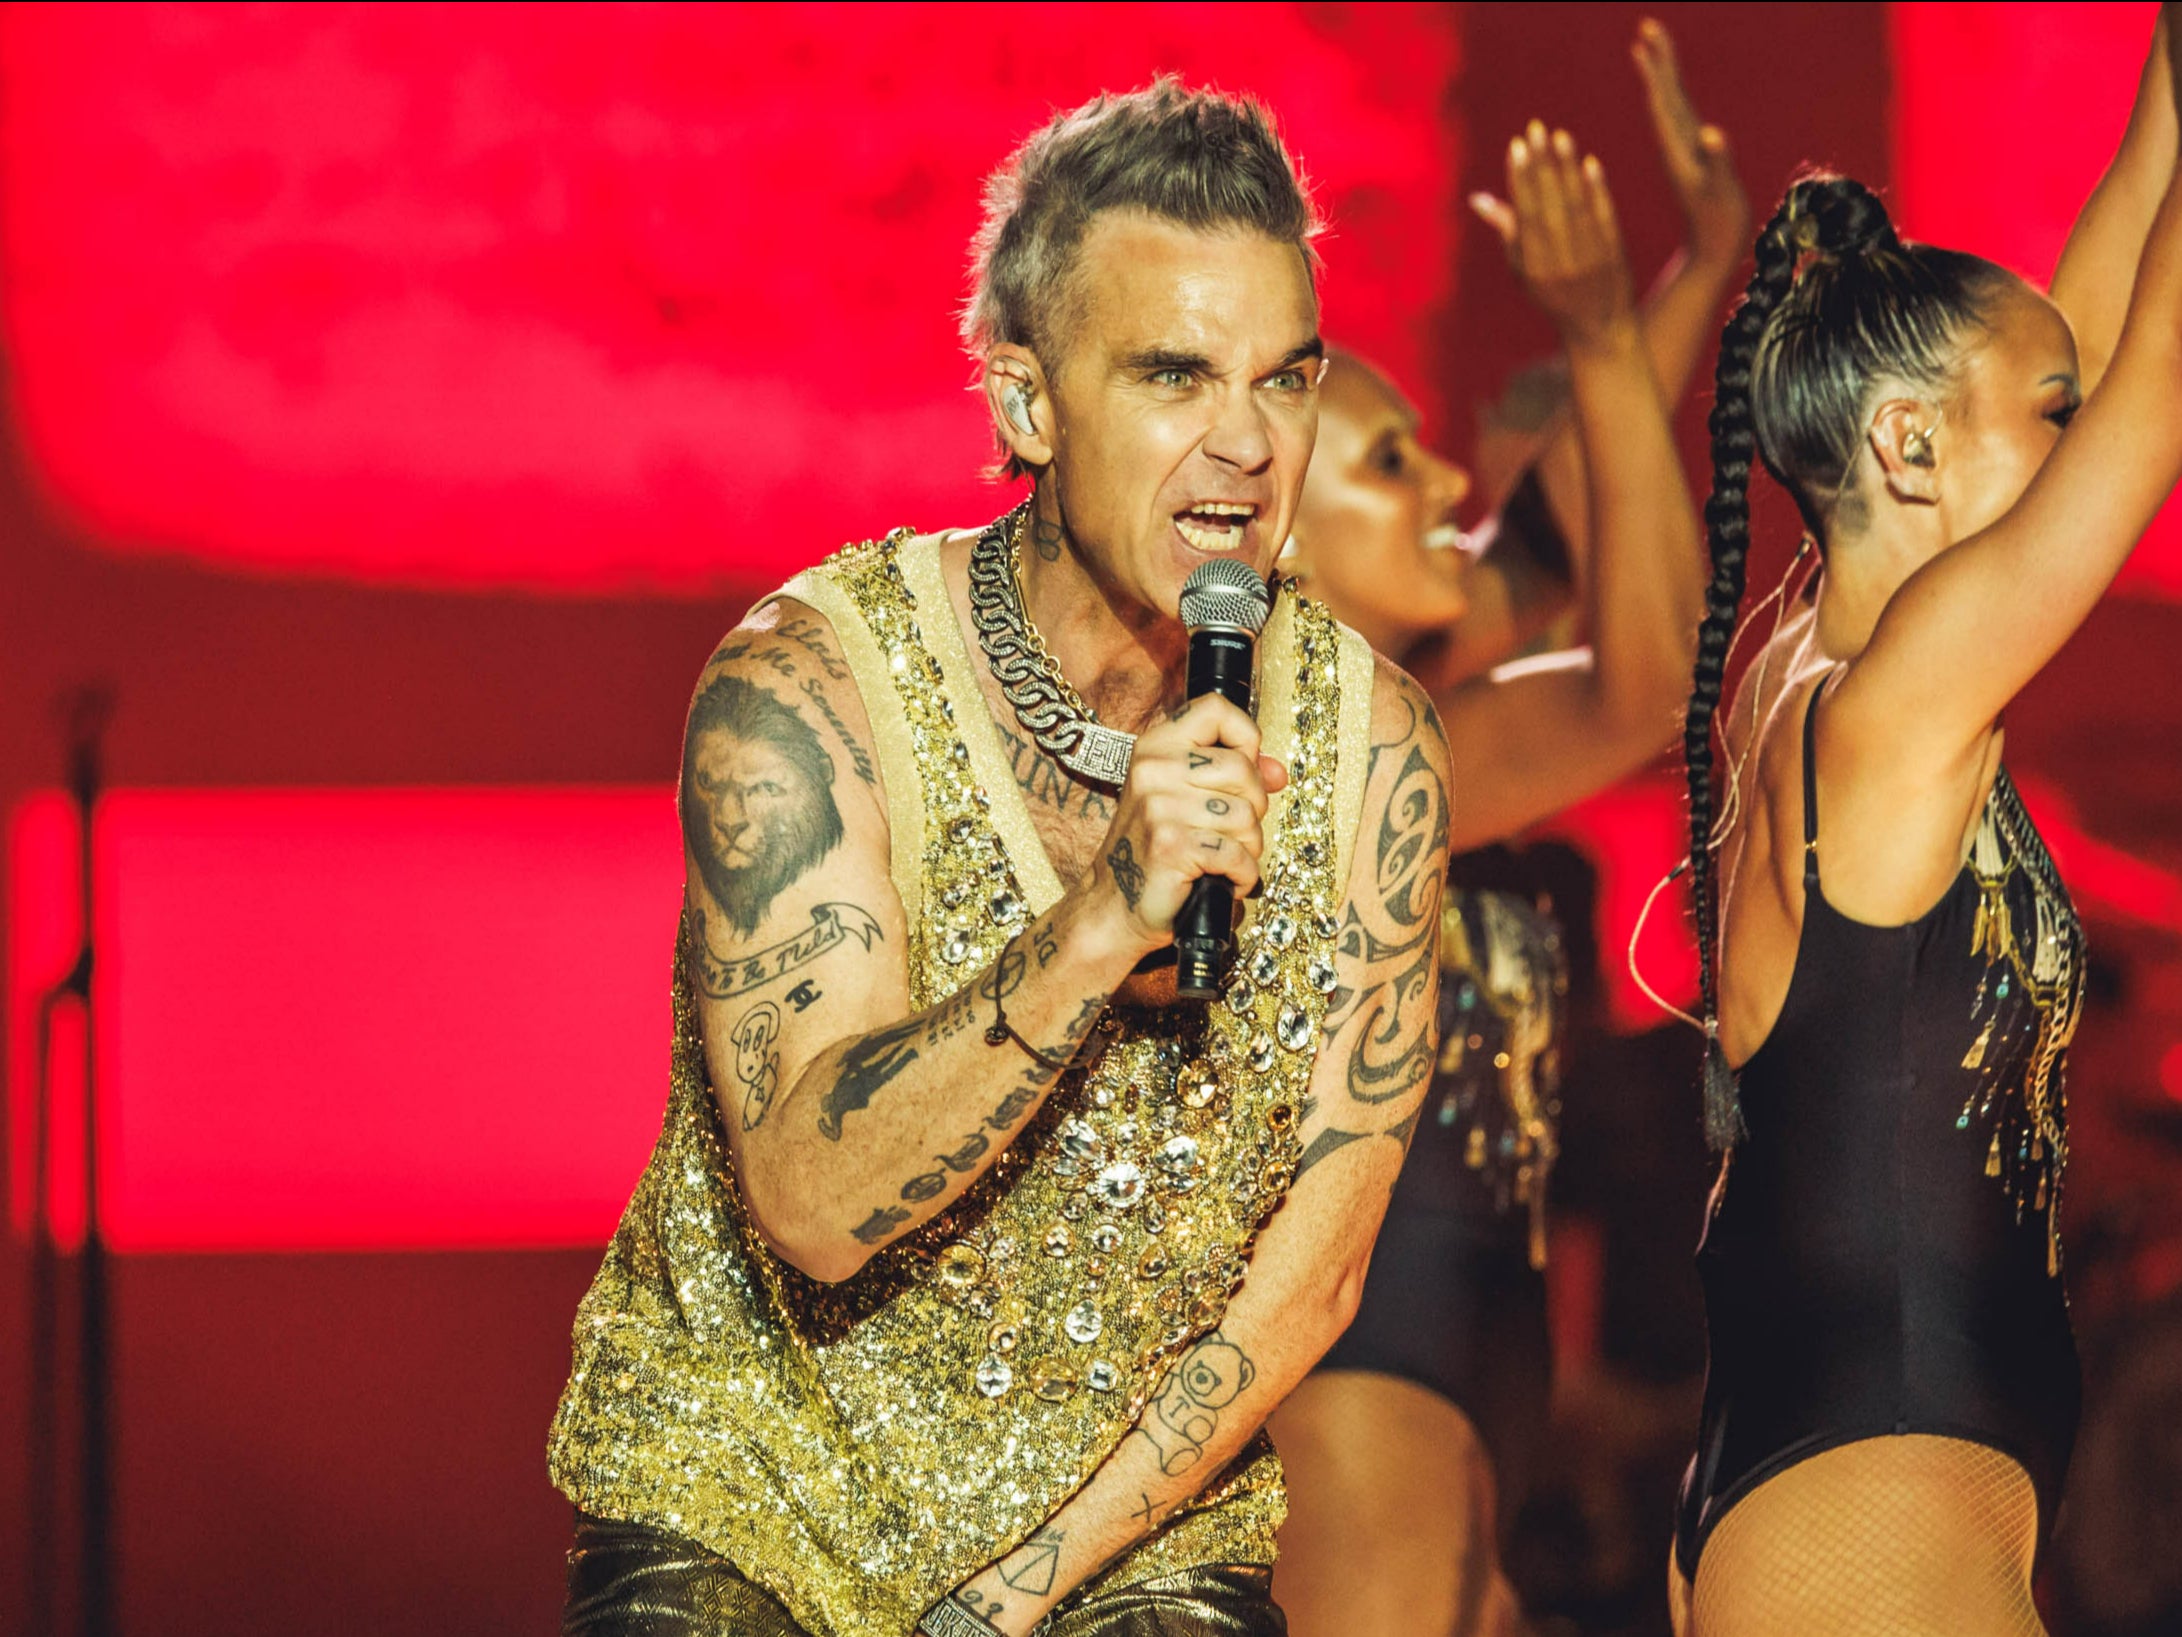 Robbie Williams plays Thursday of Mad Cool festival